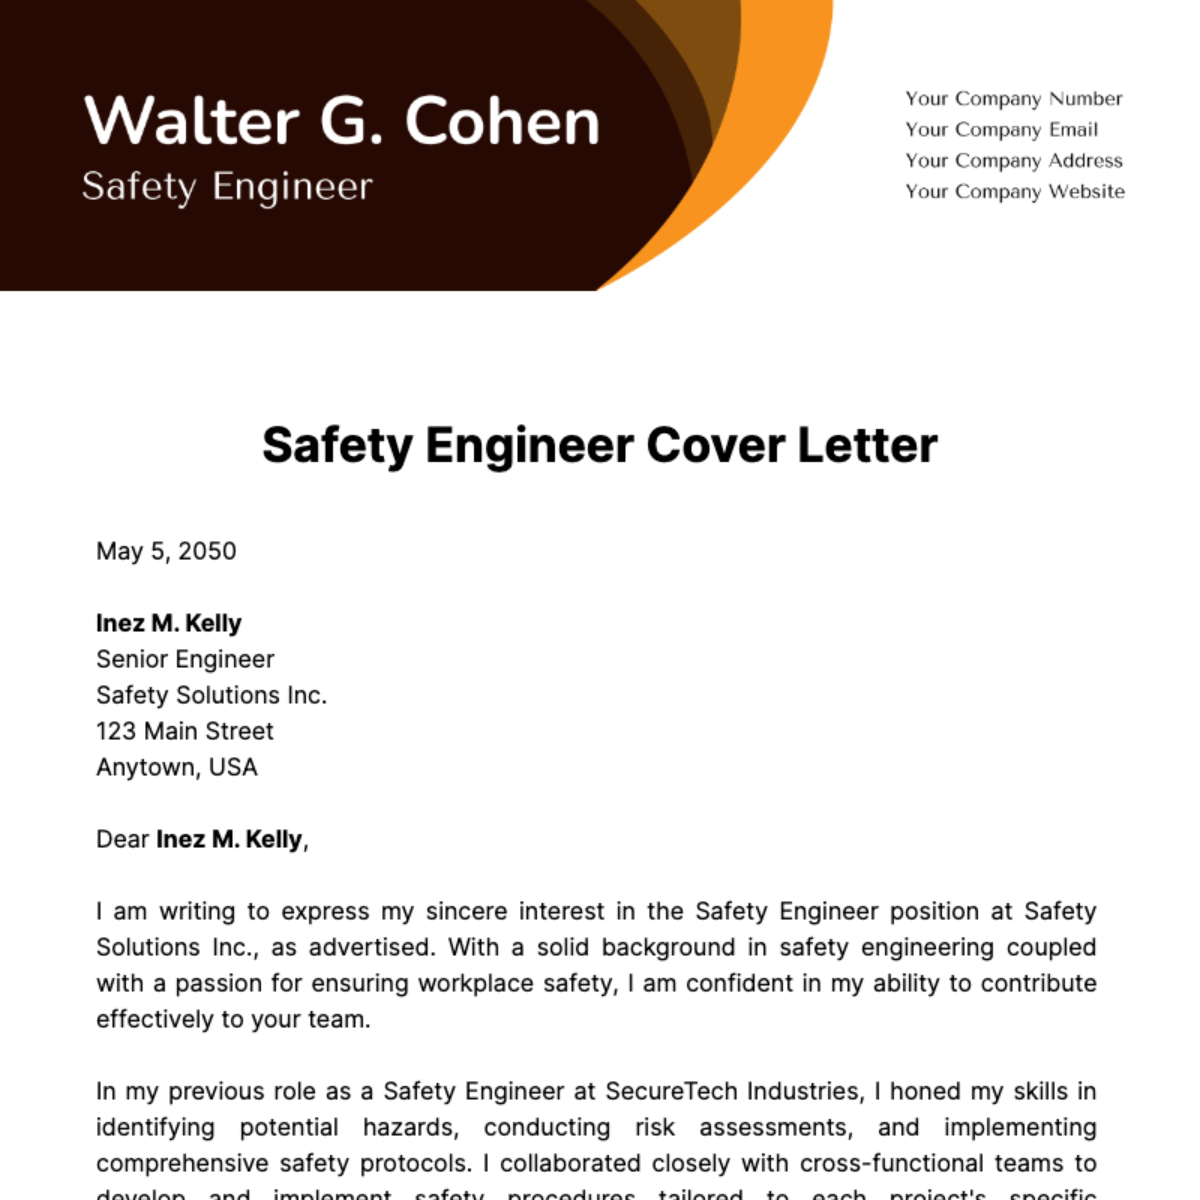 Safety Engineer Cover Letter Template